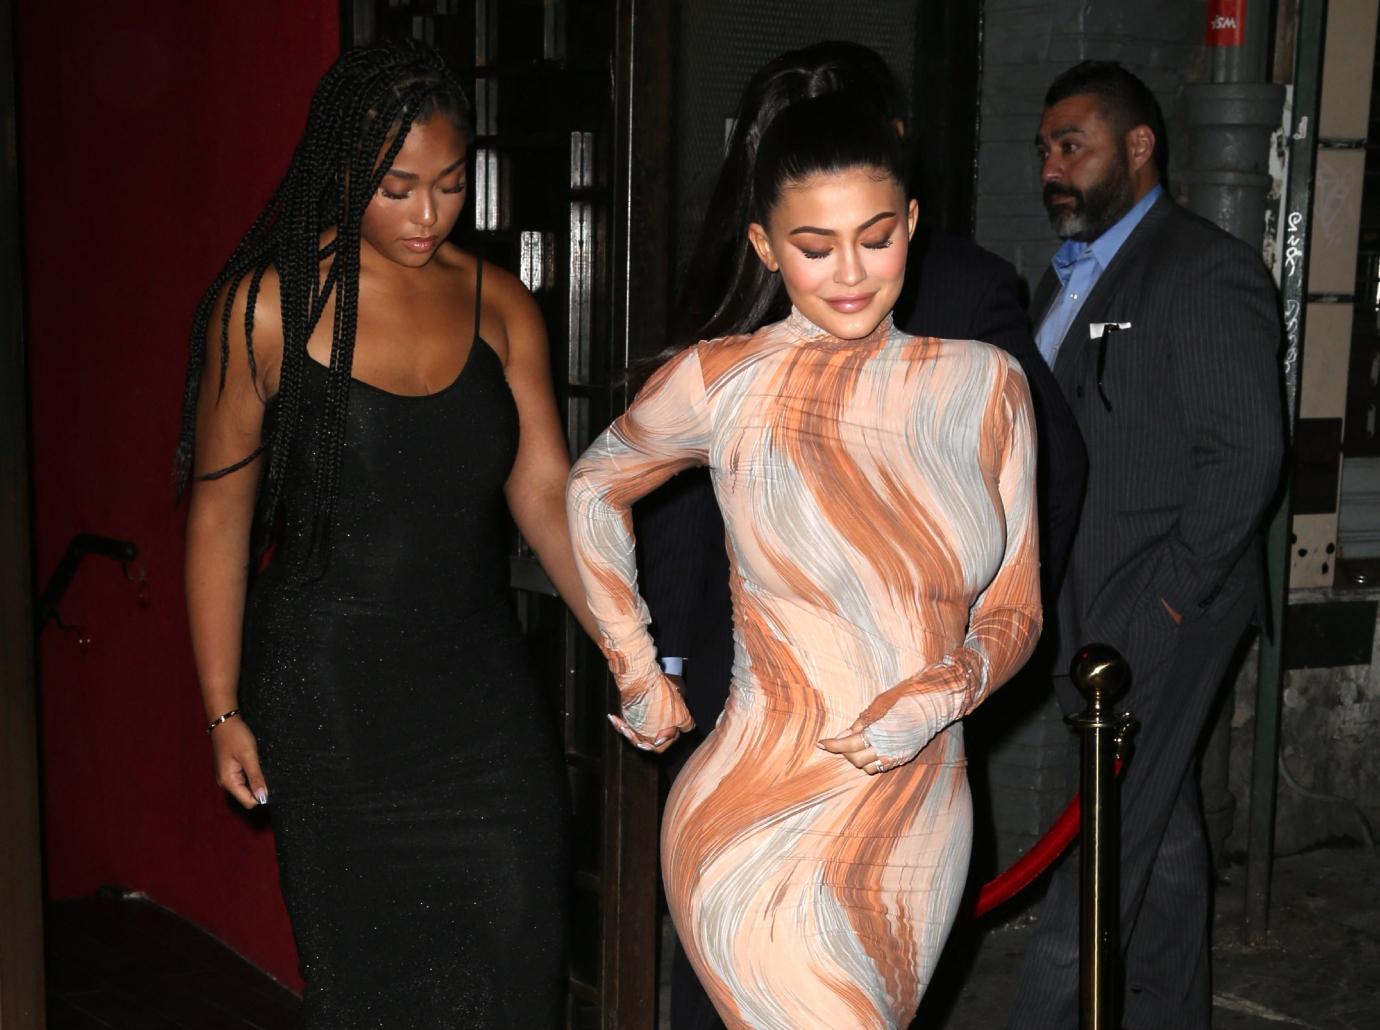 Jordyn Woods flaunts curves in tight dress after being accused of